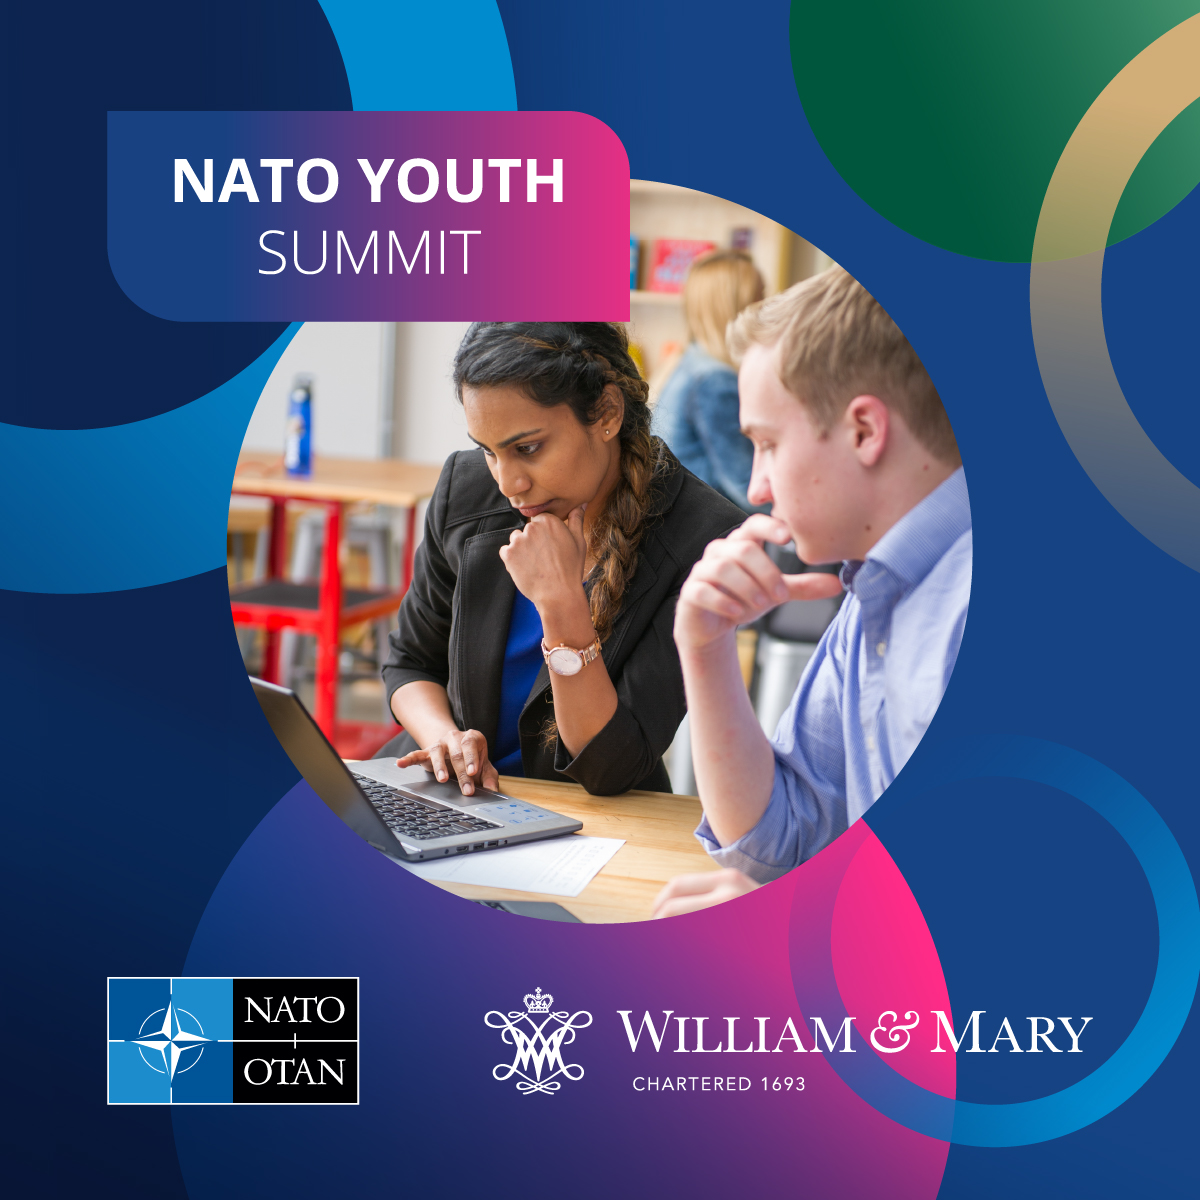 NATO Youth Summit - Two people engaged in conversation - NATO/OTAN and William &amp; Mary